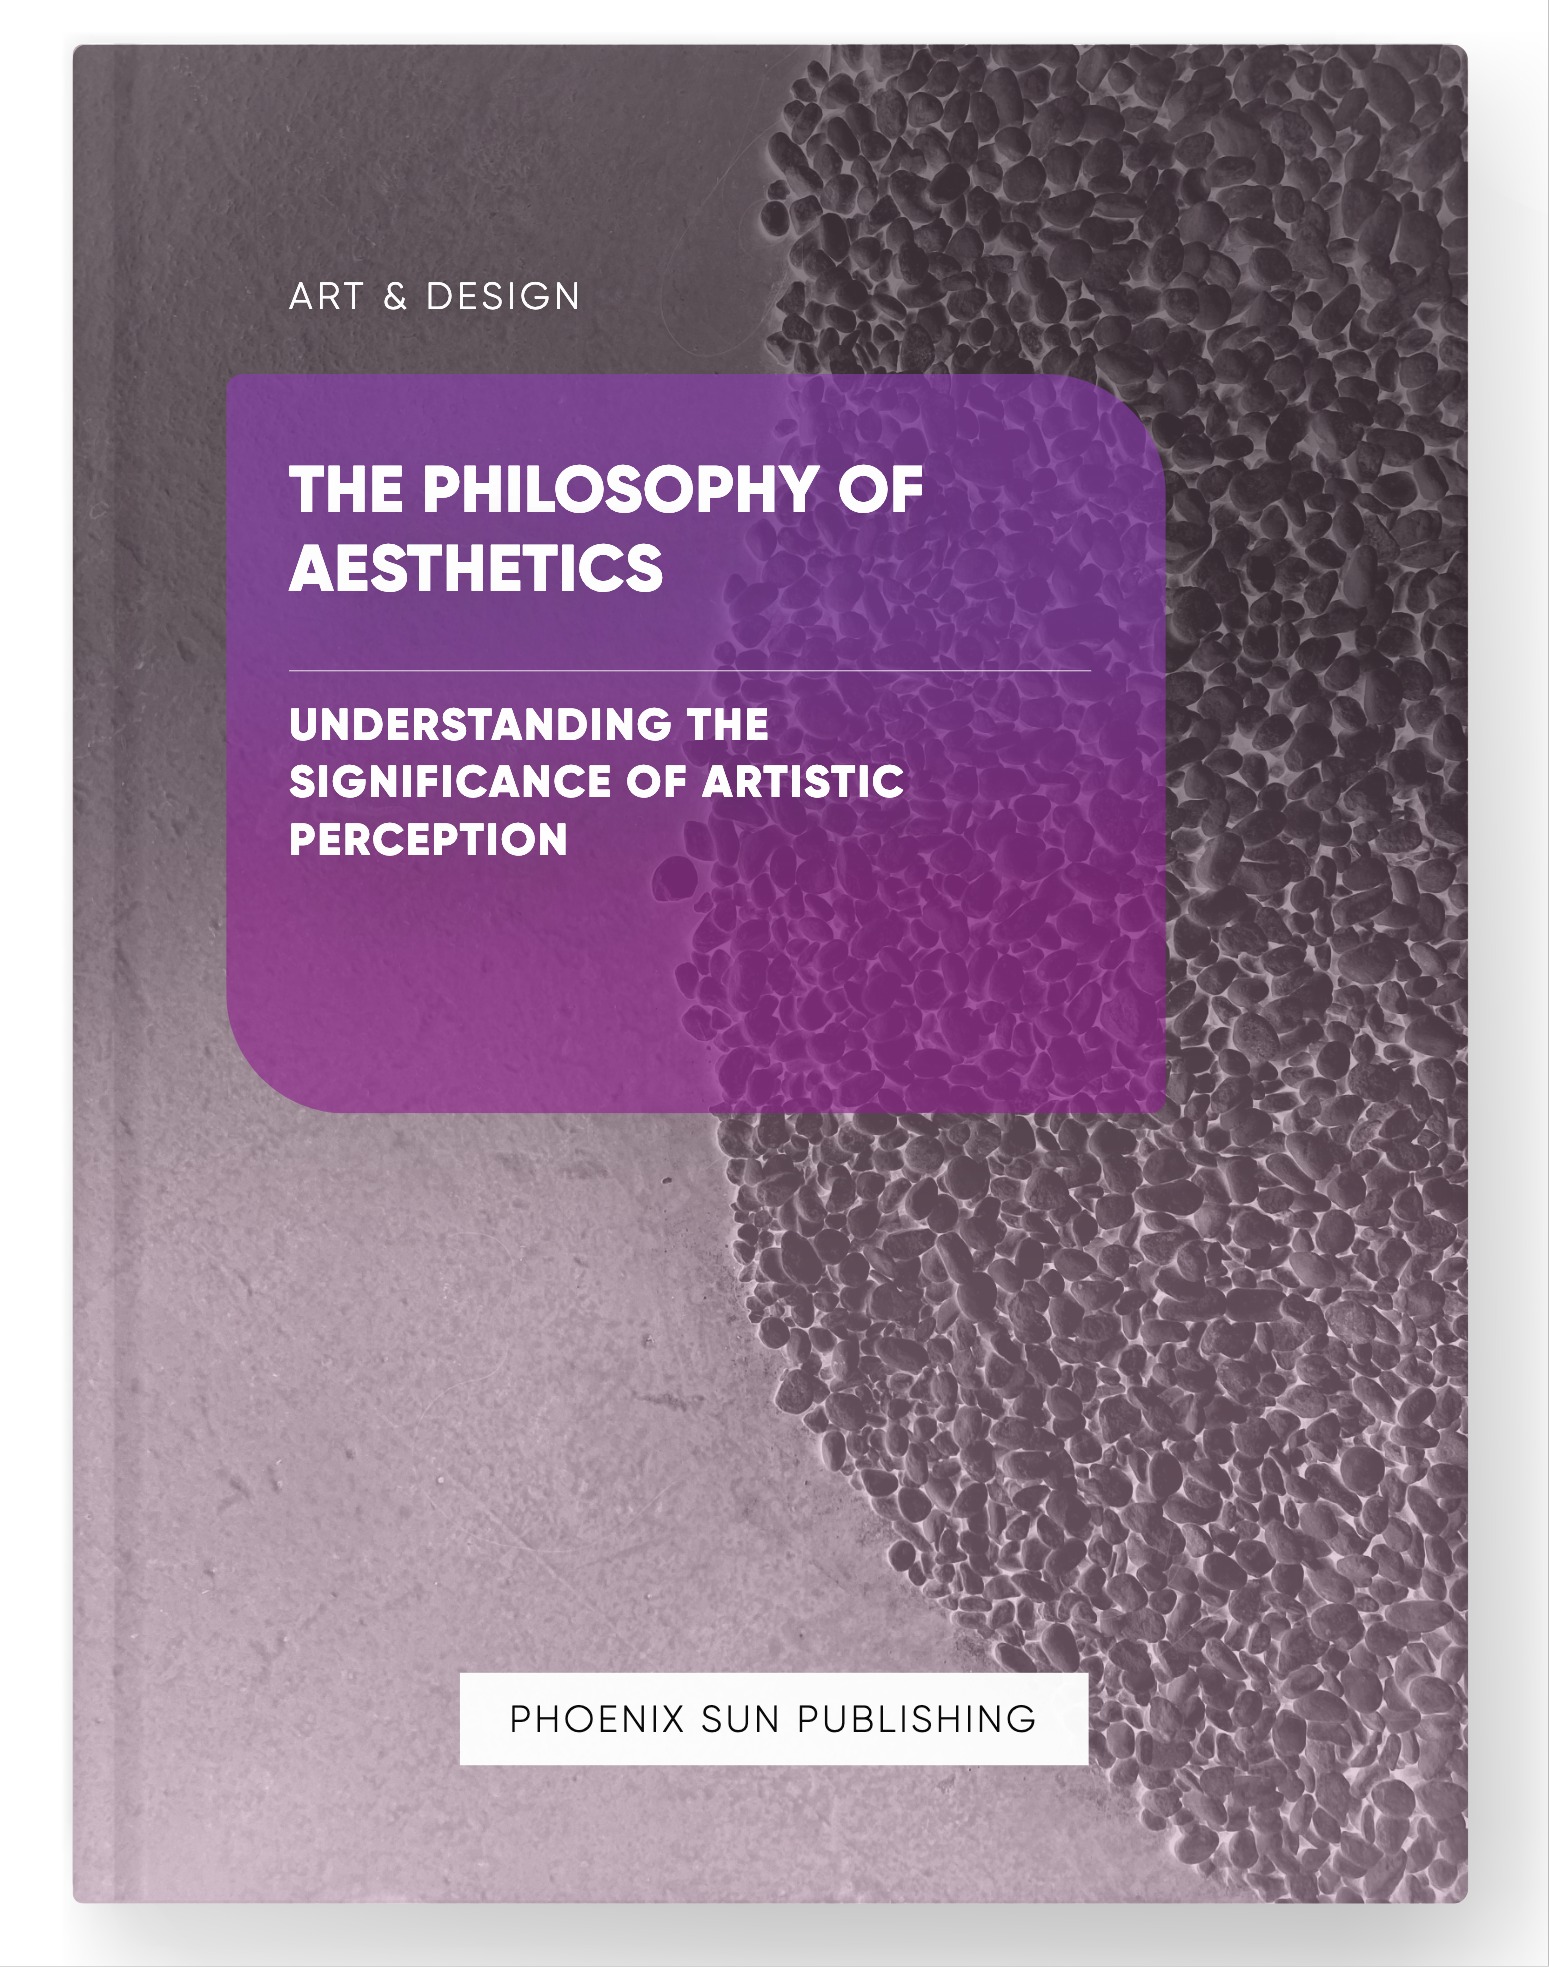 The Philosophy of Aesthetics – Understanding the Significance of Artistic Perception